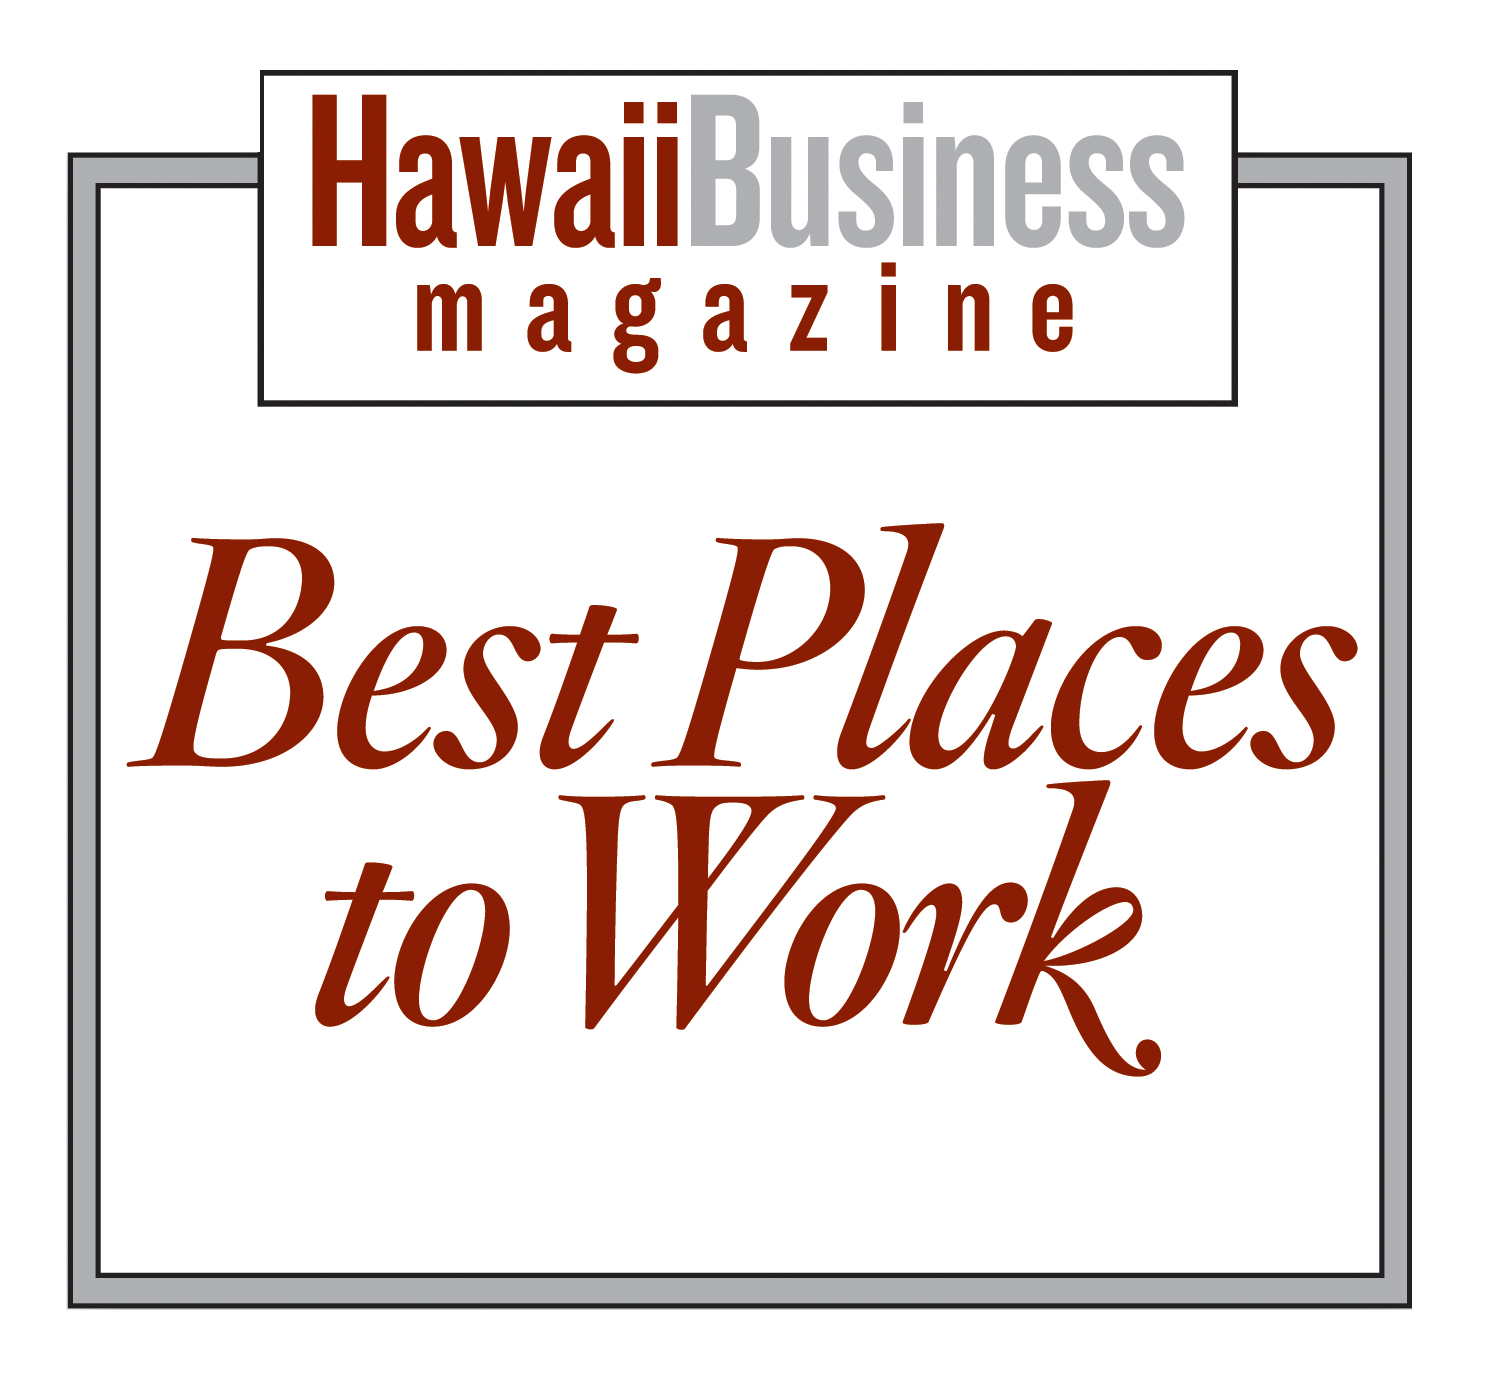 One of Hawaii's best places to work